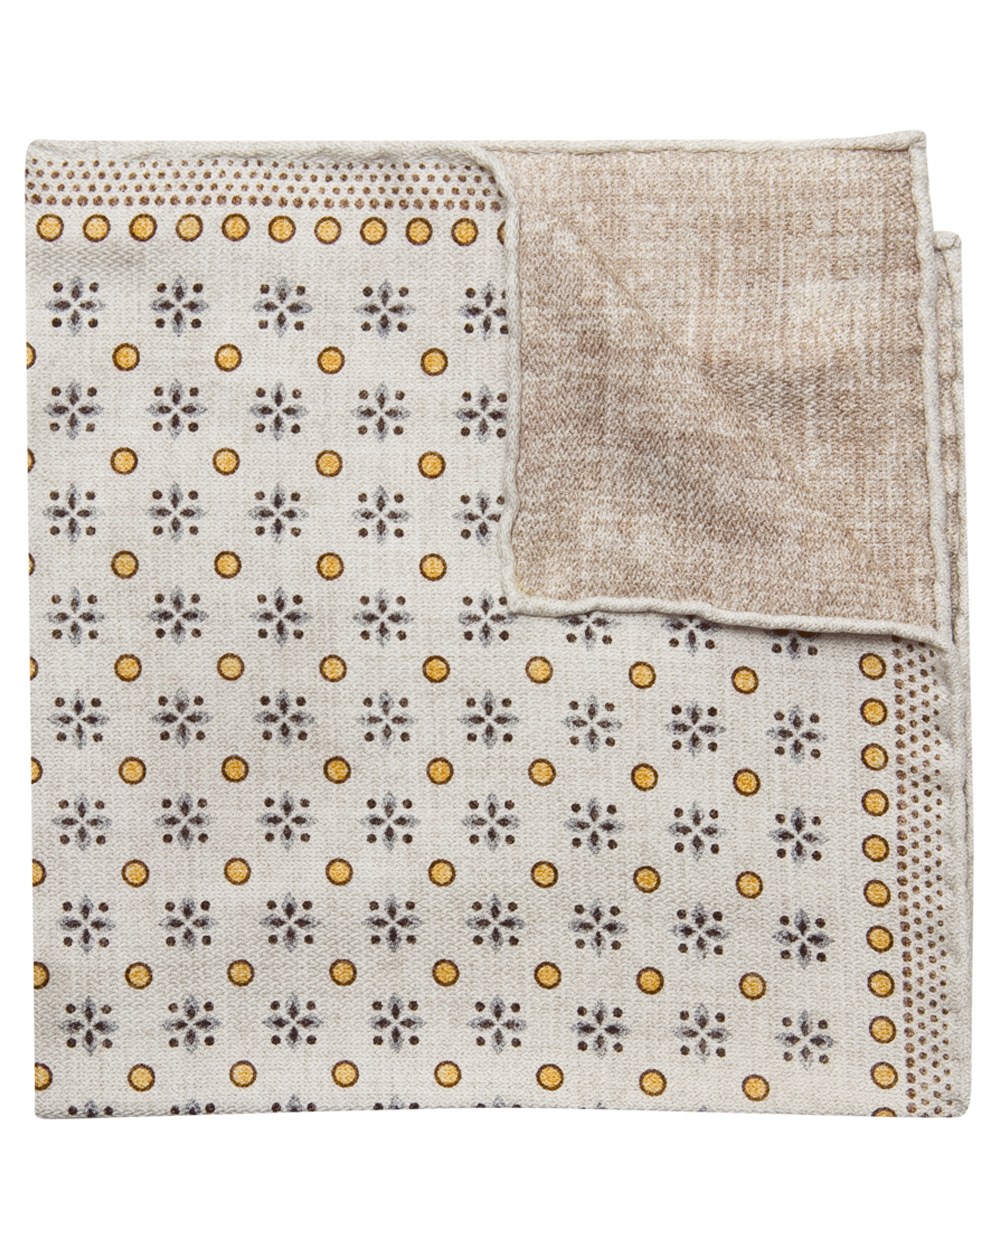 White and Yellow Geometric Pocket Square